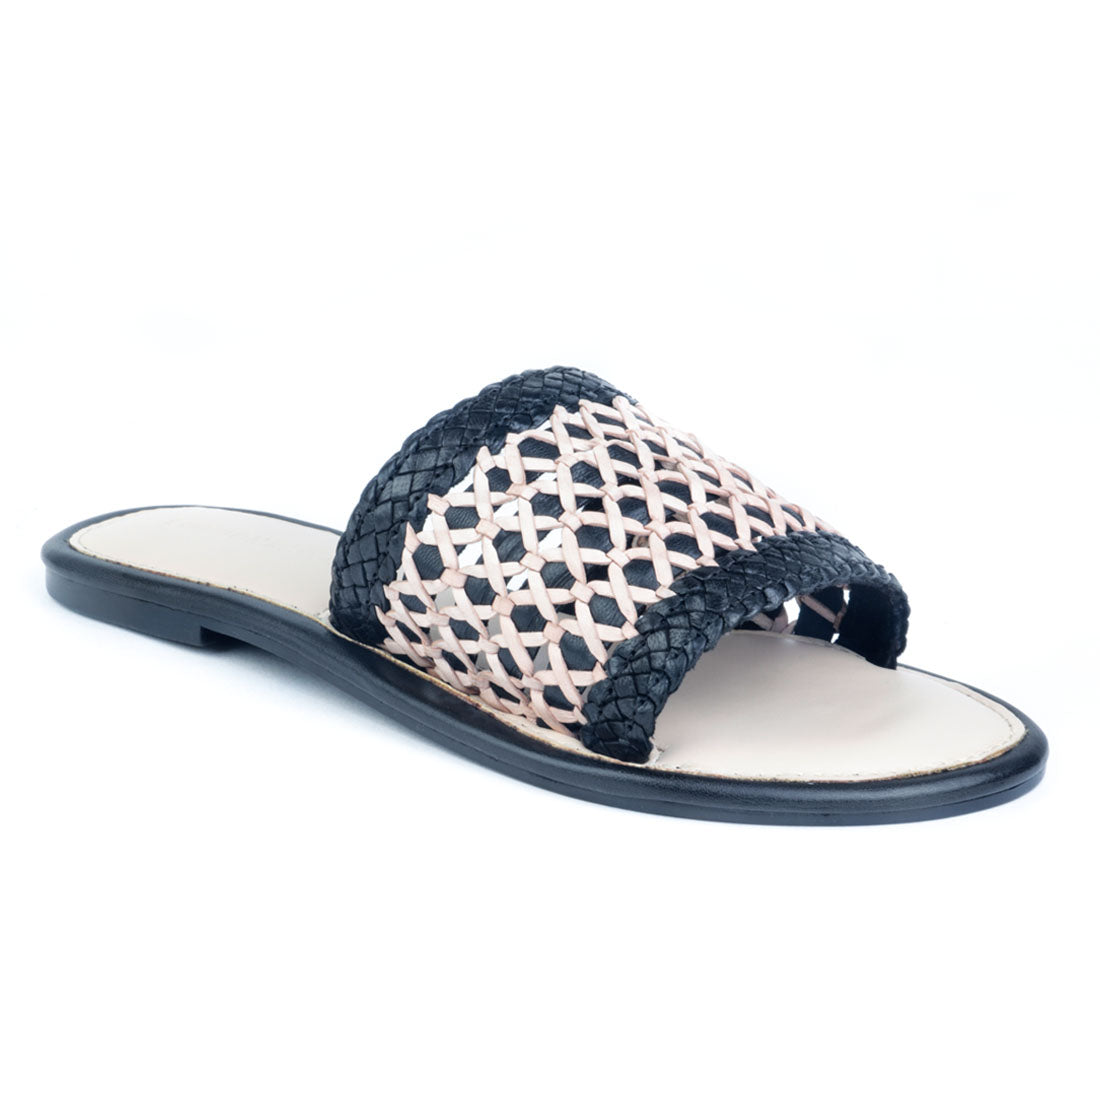 Nude and Black Woven Slip-On Flat - Nude